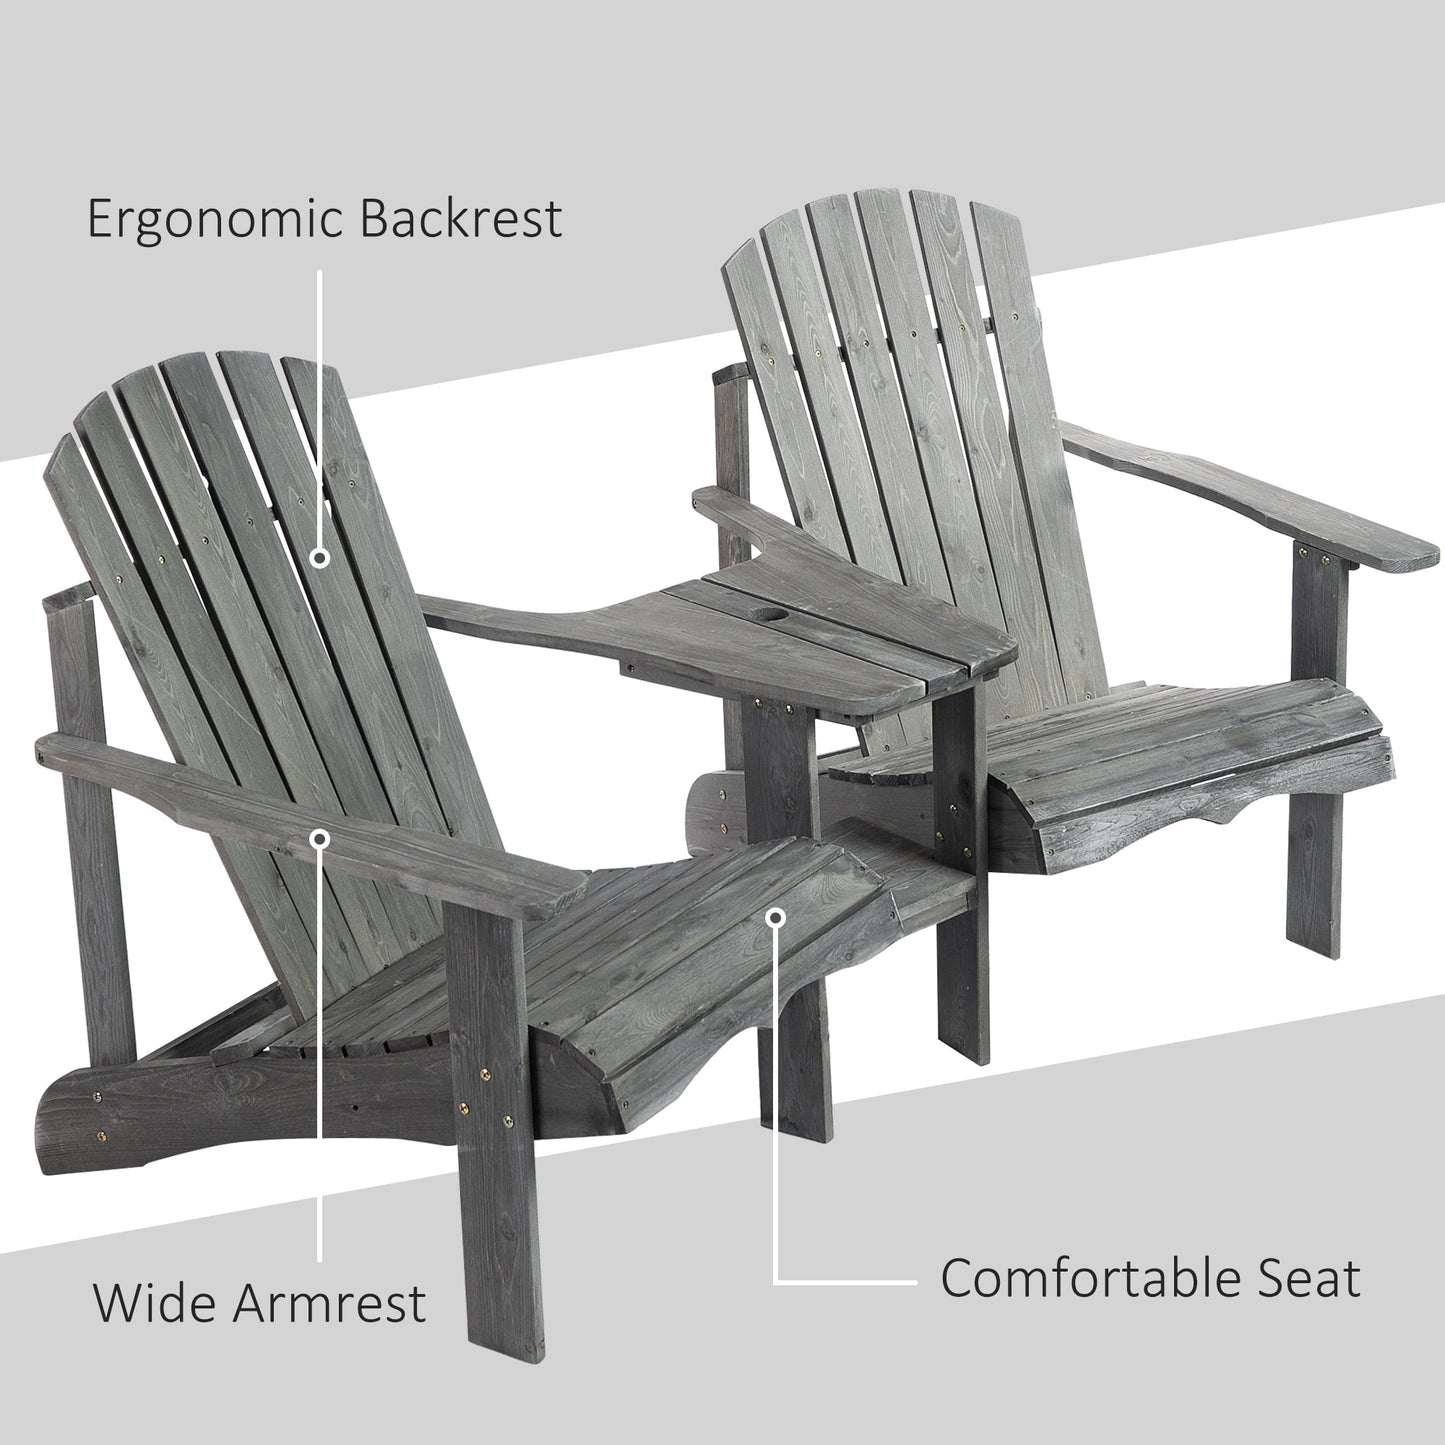 Outsunny Wooden Outdoor Double Adirondack Chairs Loveseat w-Center Table and Umbrella Hole, Garden Patio Furniture for Lounging and Relaxing, Grey